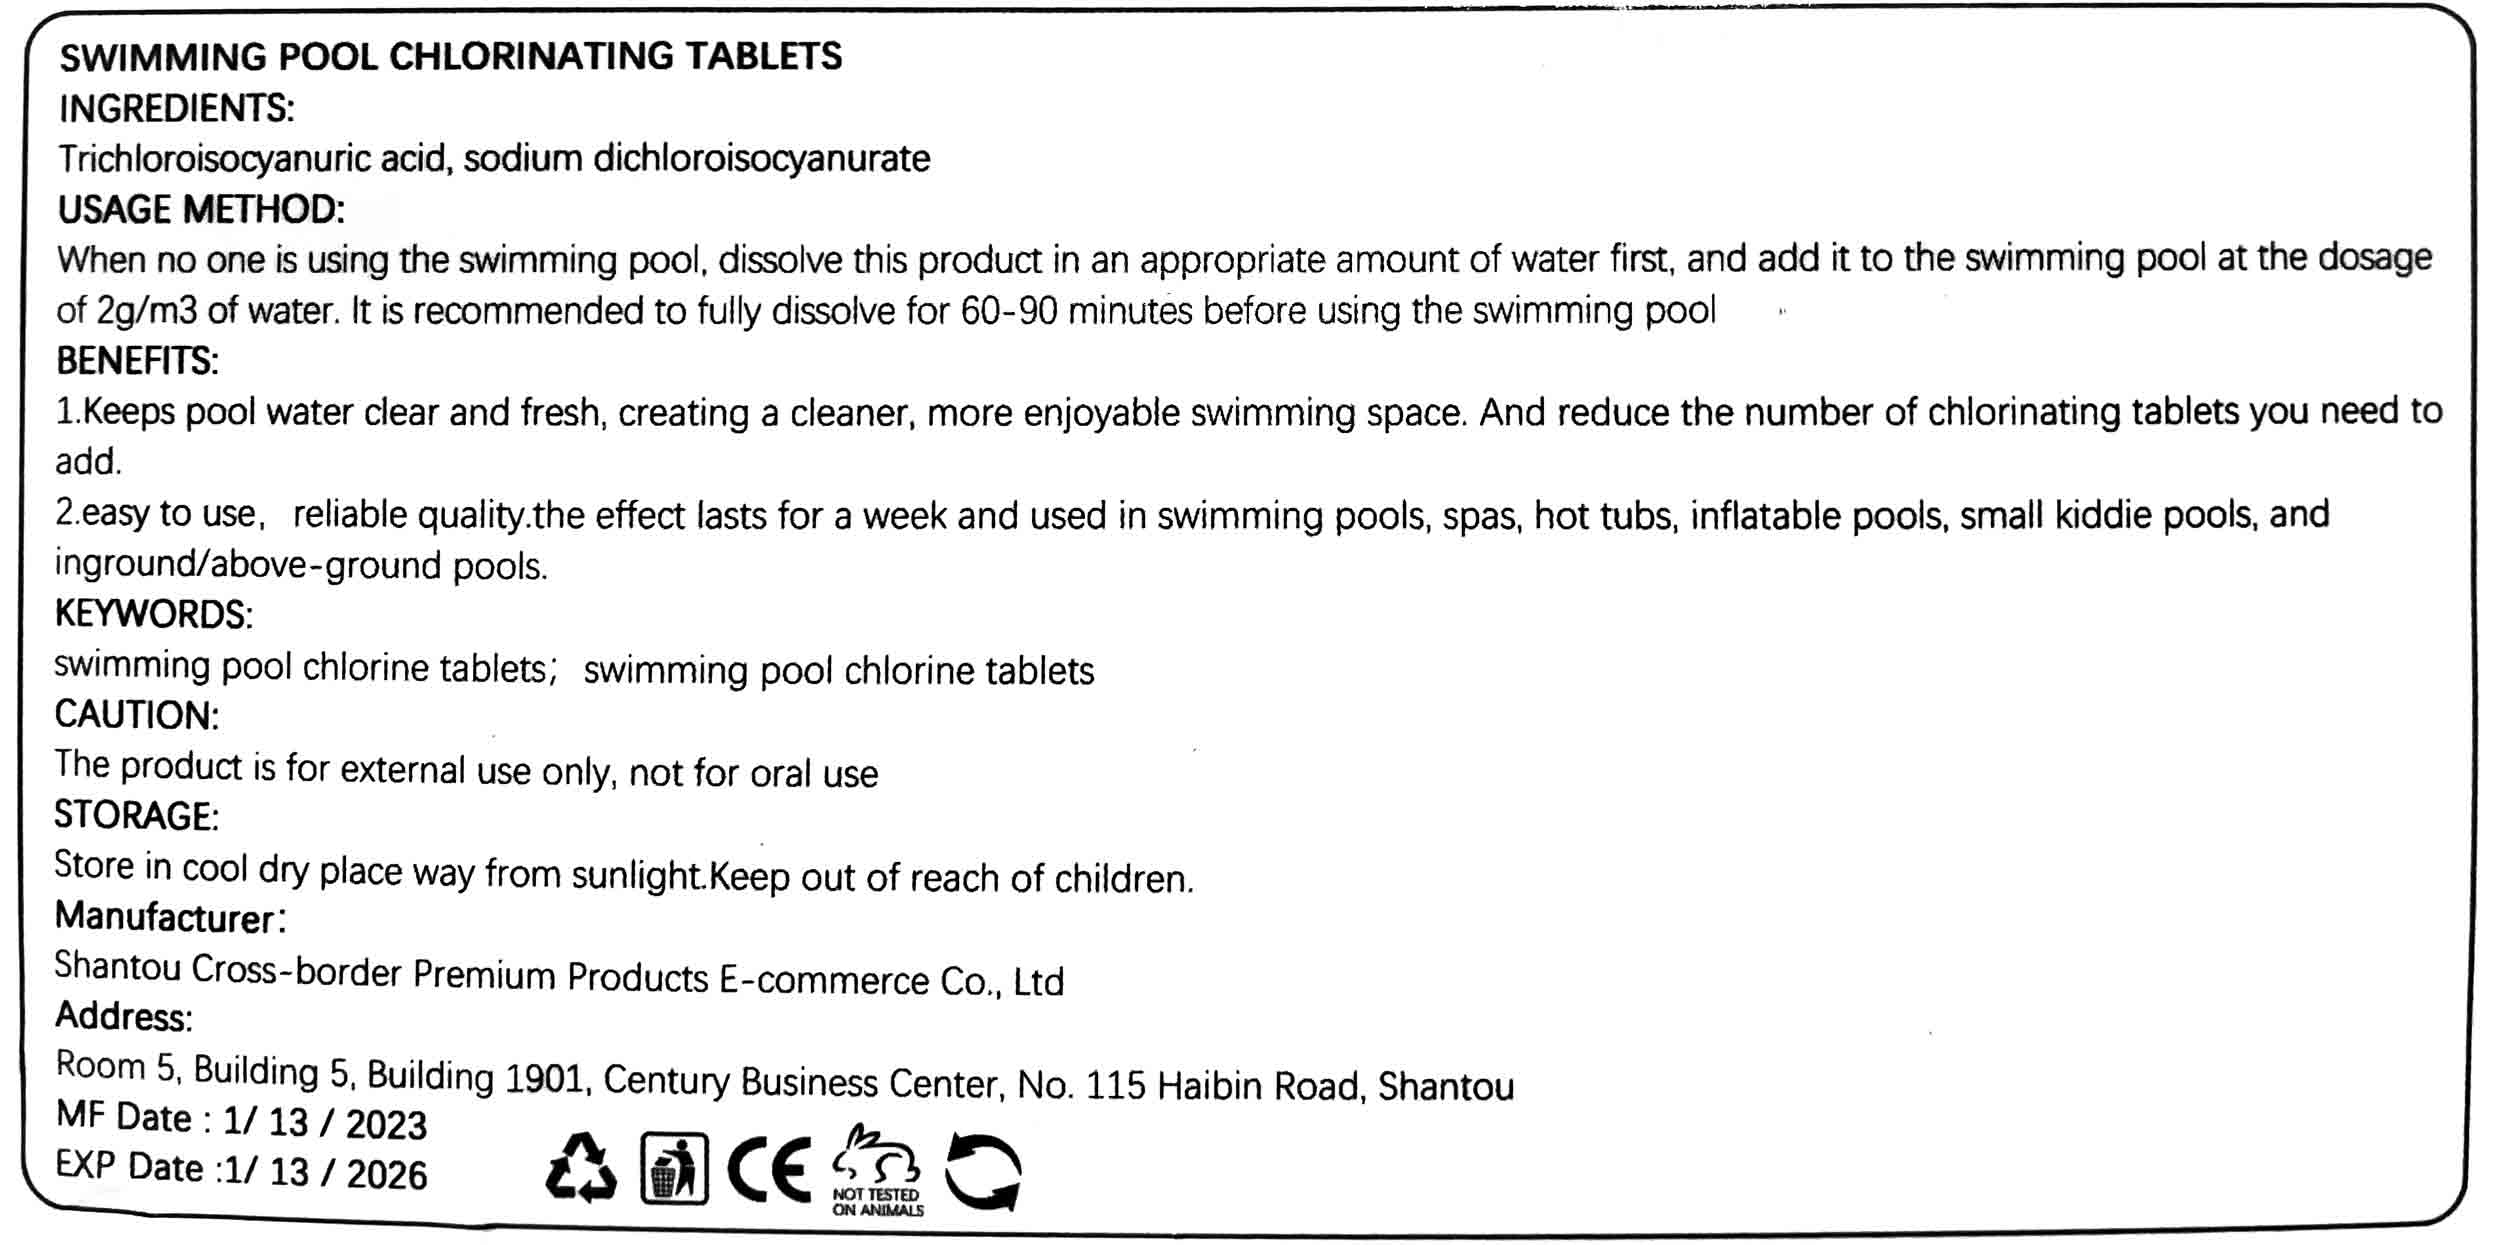 example of a chlorine tablet label that isn't registered with the EPA